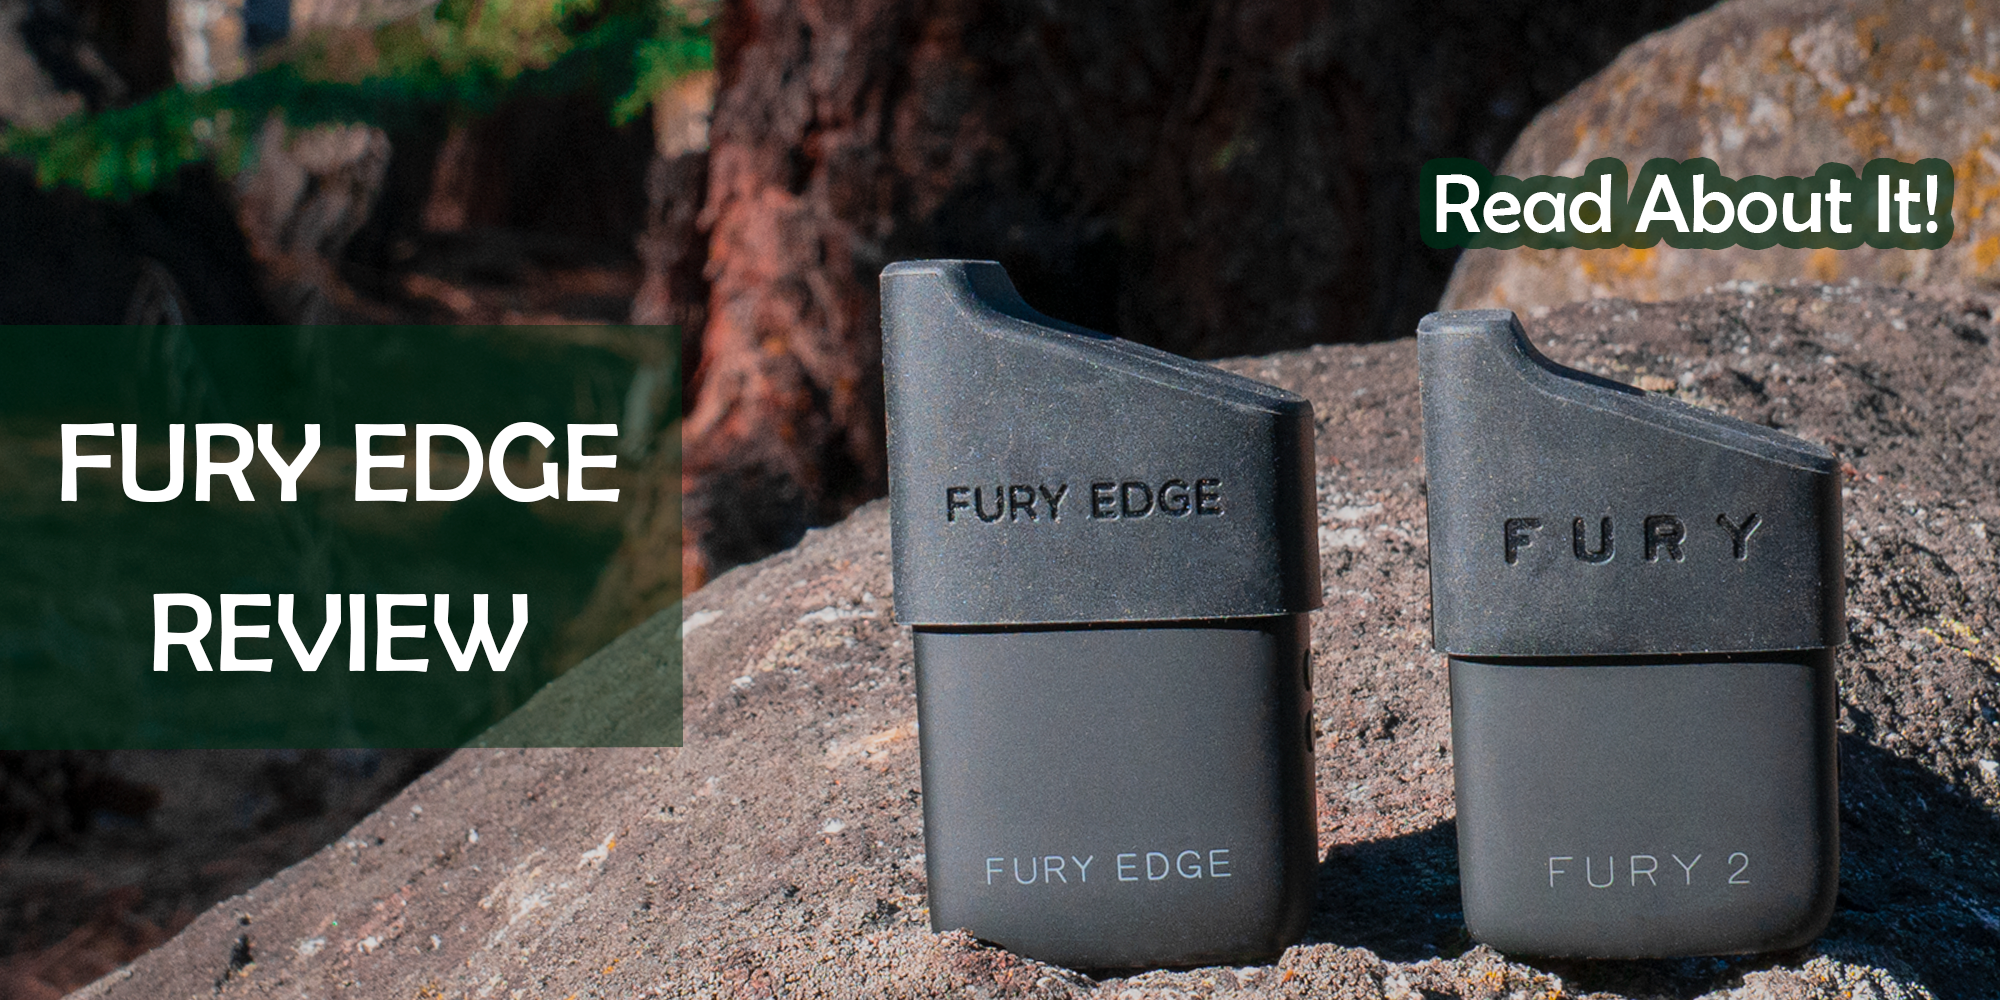 Fury EDGE ultimate review and user guide